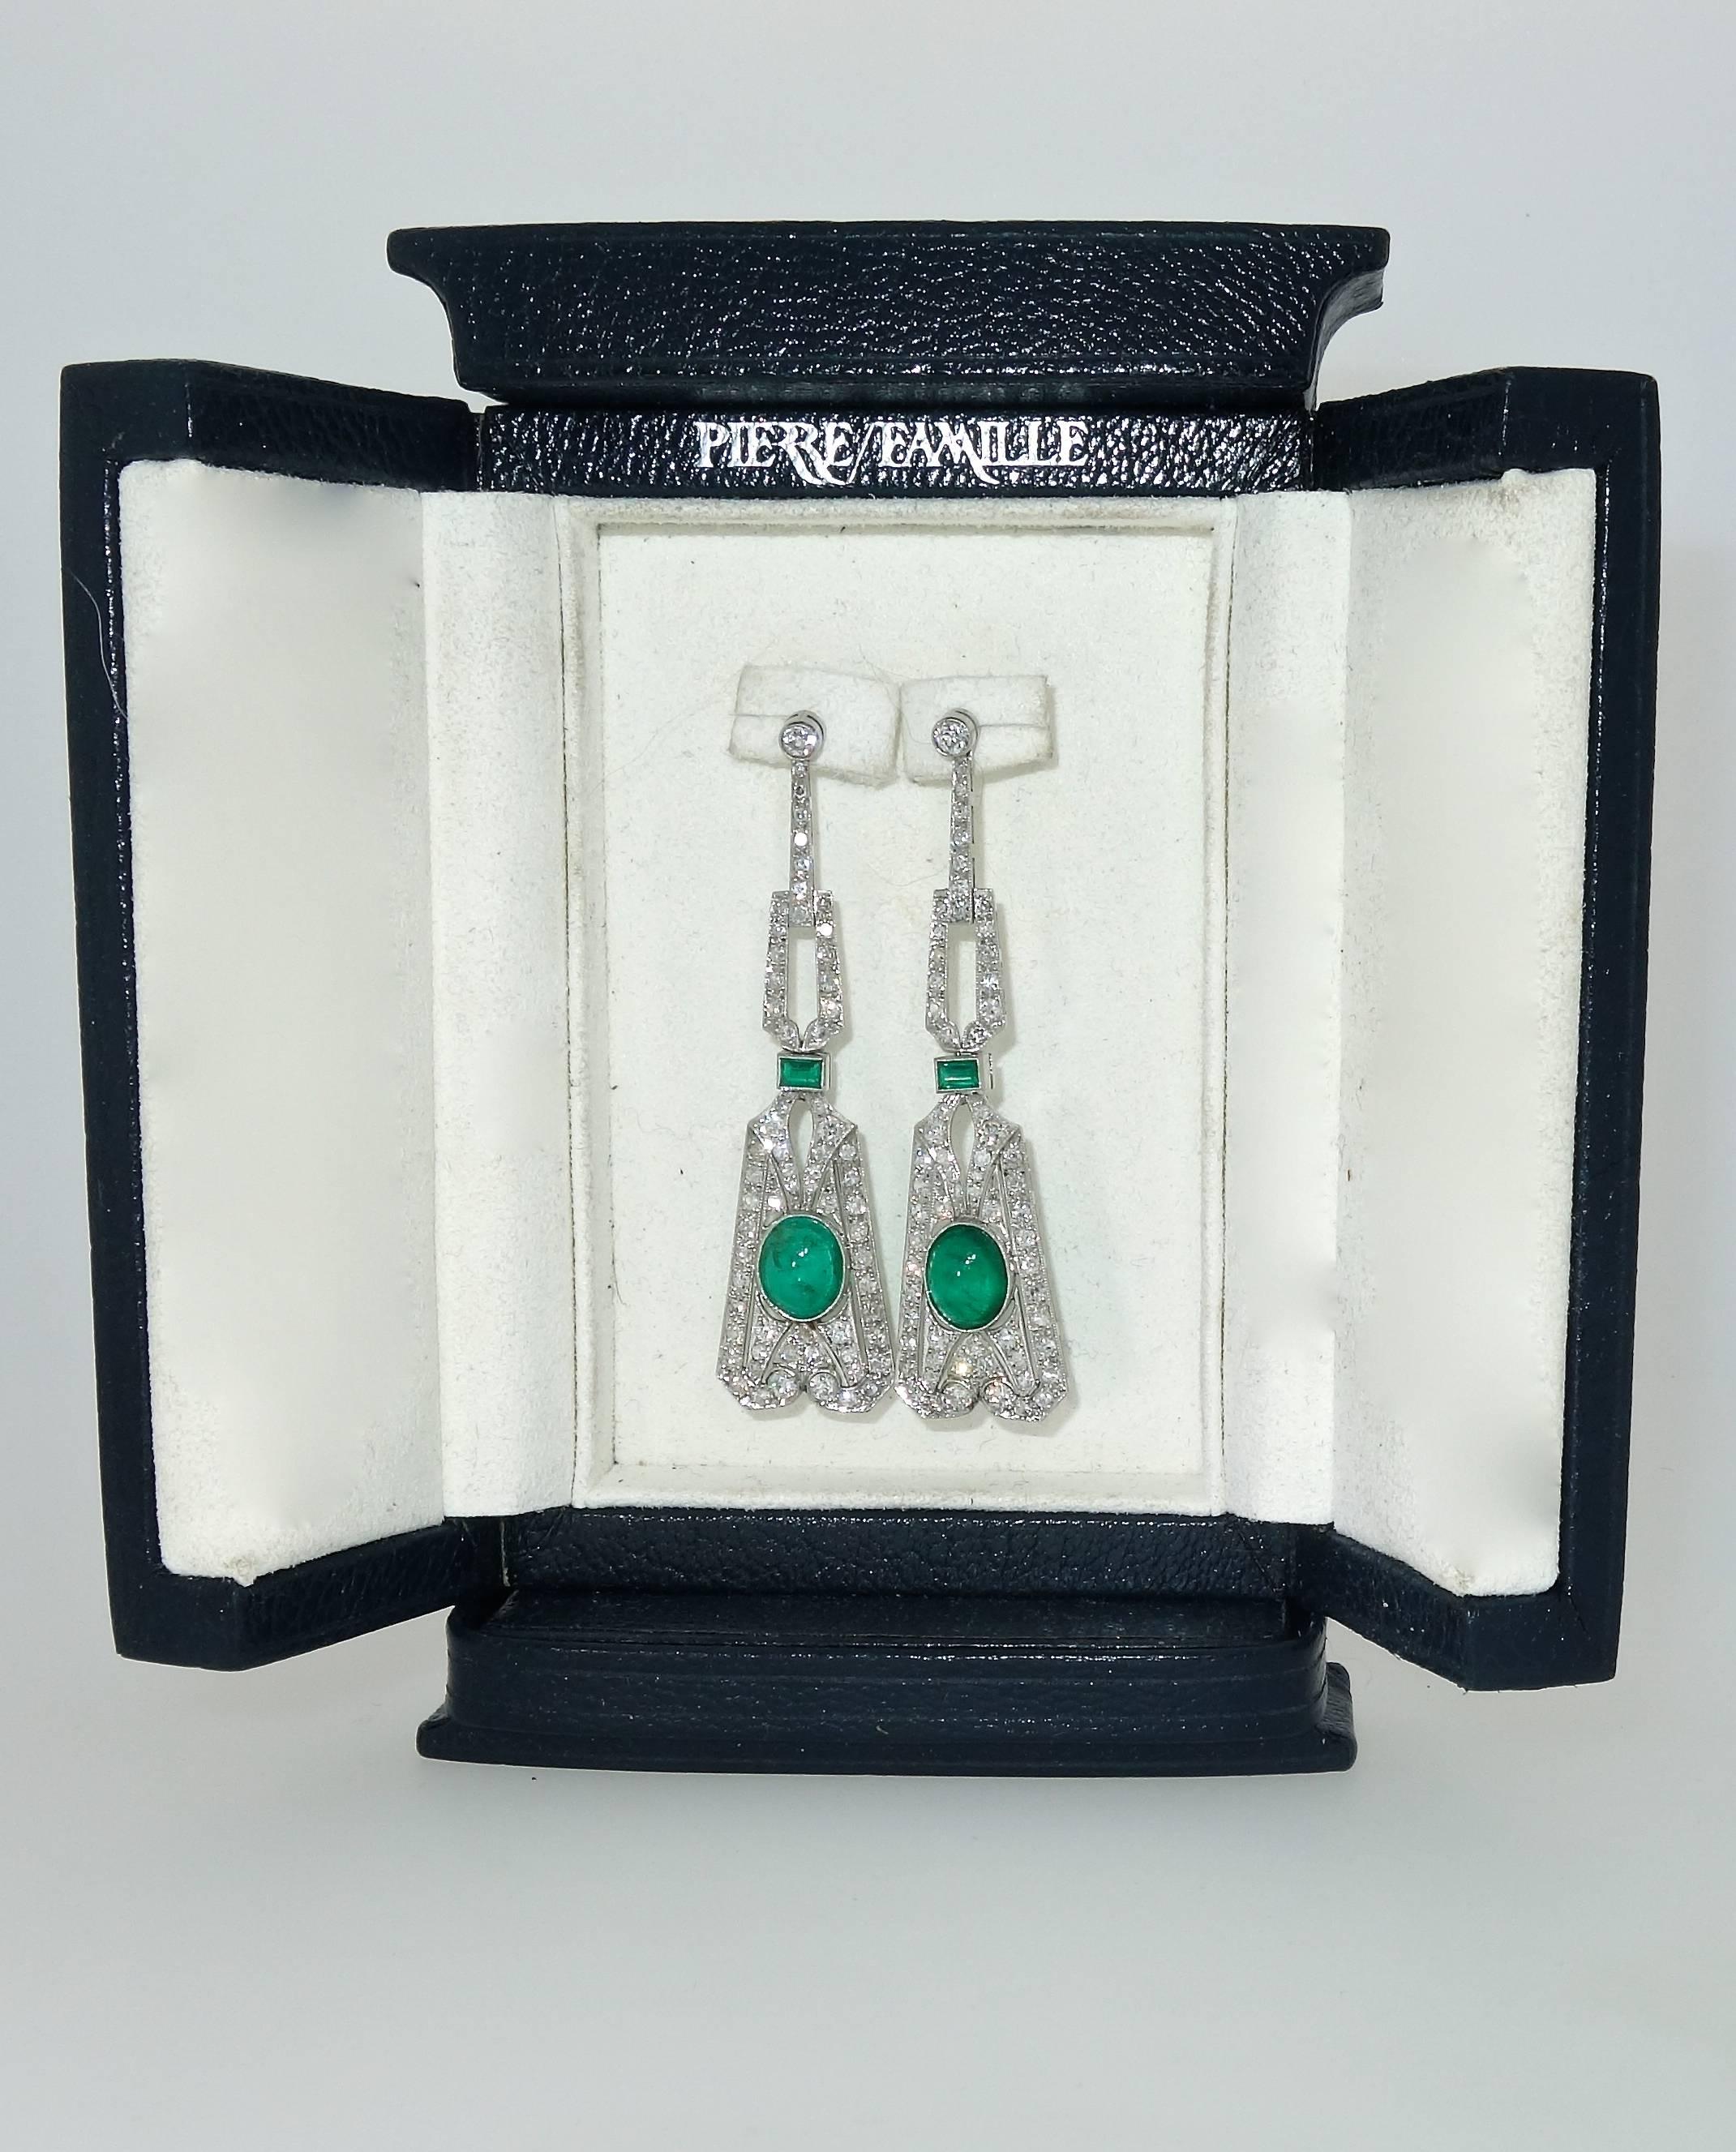 Art Deco pendant earrings with approximately 5.25 cts. of fine Colombian emeralds and  2.5 cts. of European cut diamonds - all near colorless (H) and very slightly included (VS).  These earrings are 2.5 inches long and are now designed for a pierced